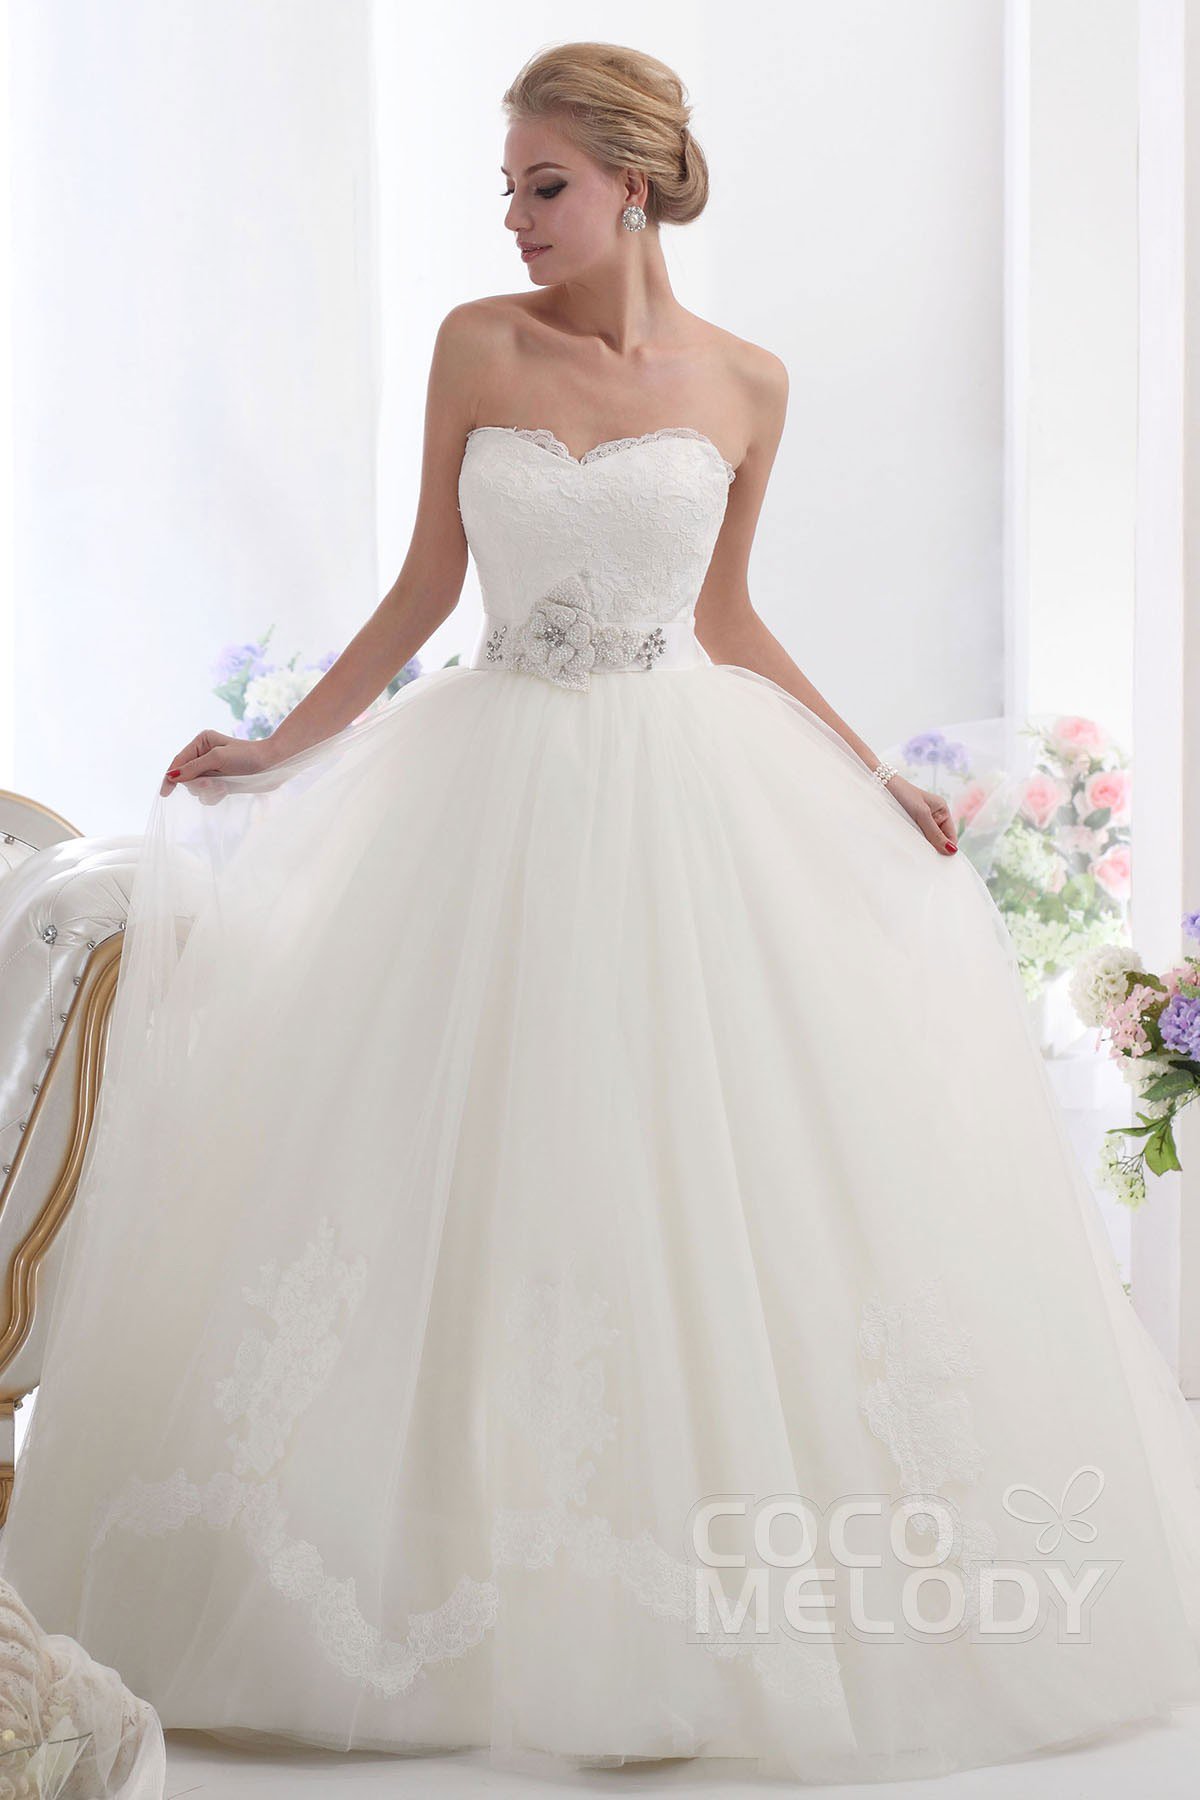 Let everyone get amazed by your Wedding ball gowns